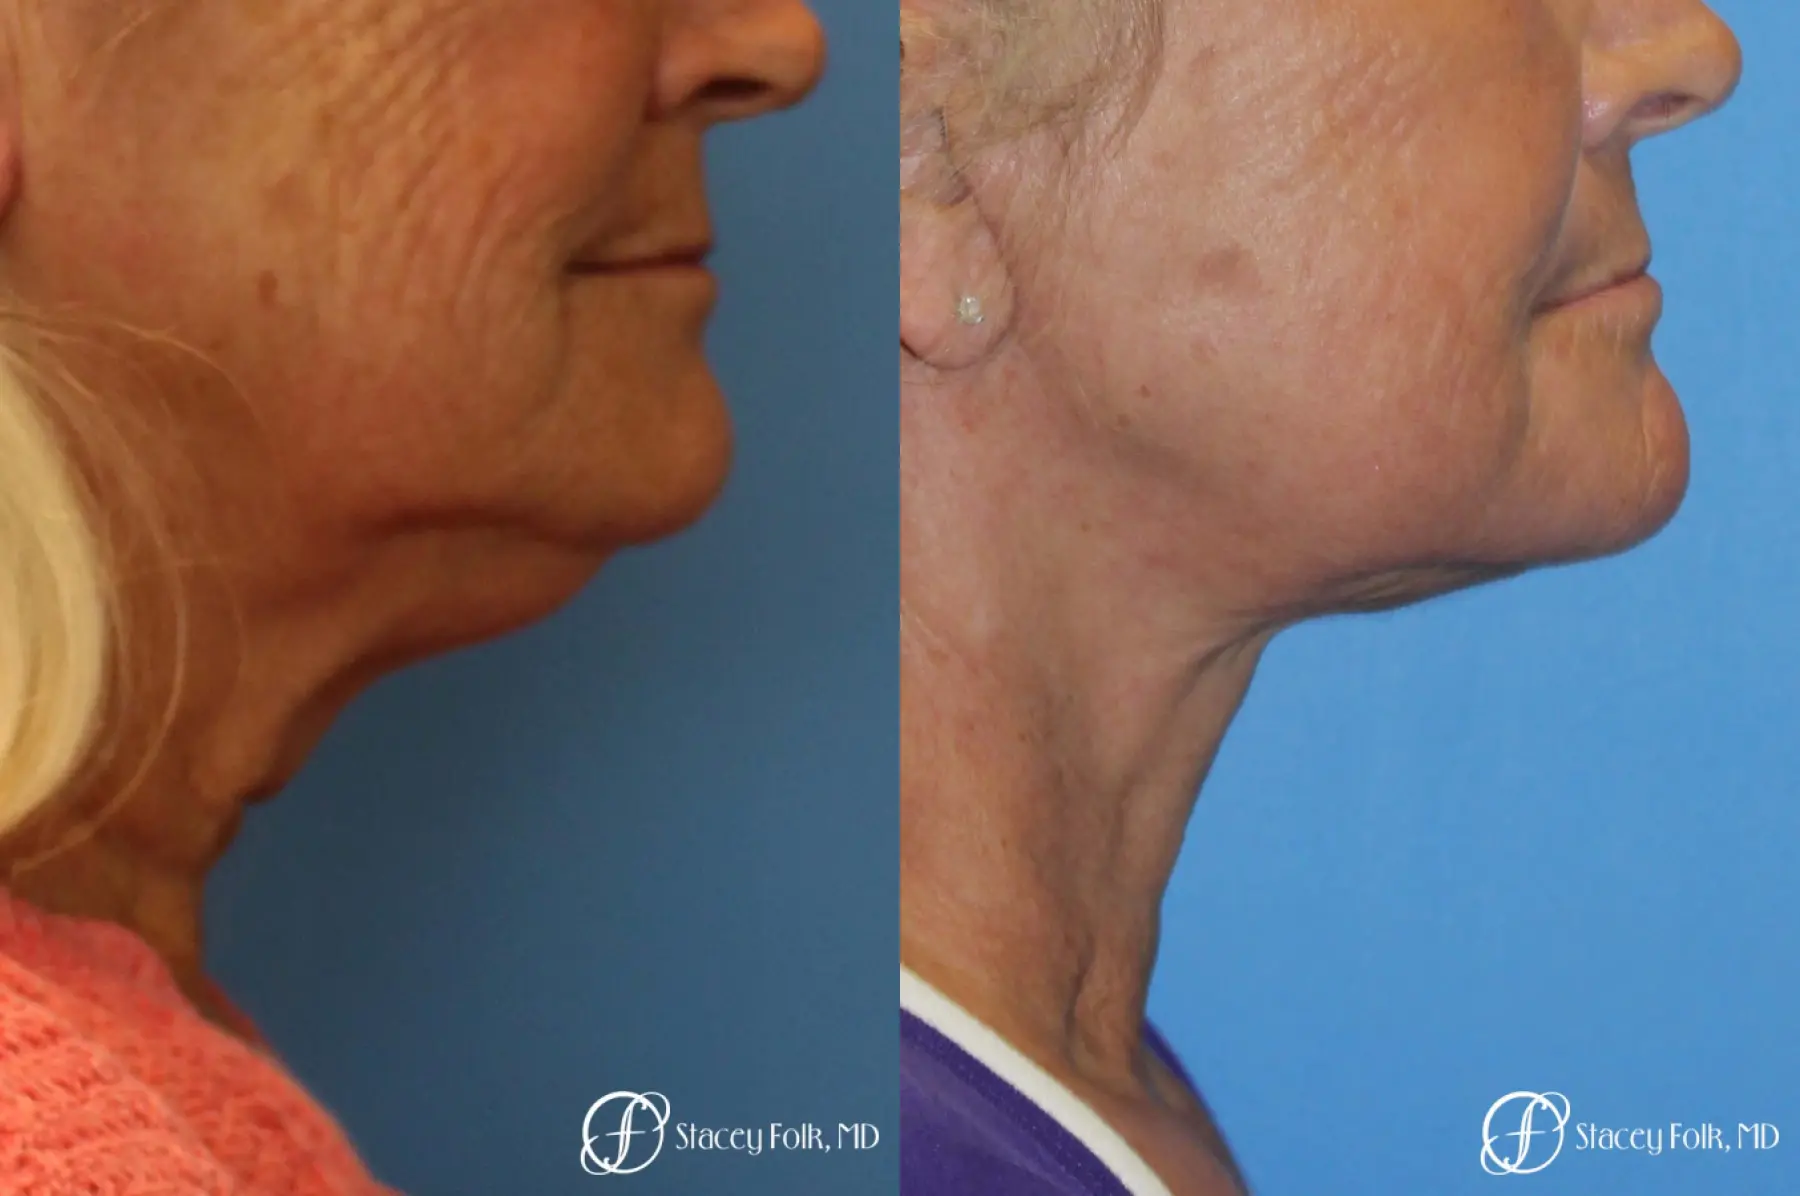 Facelift and Laser - Before and After